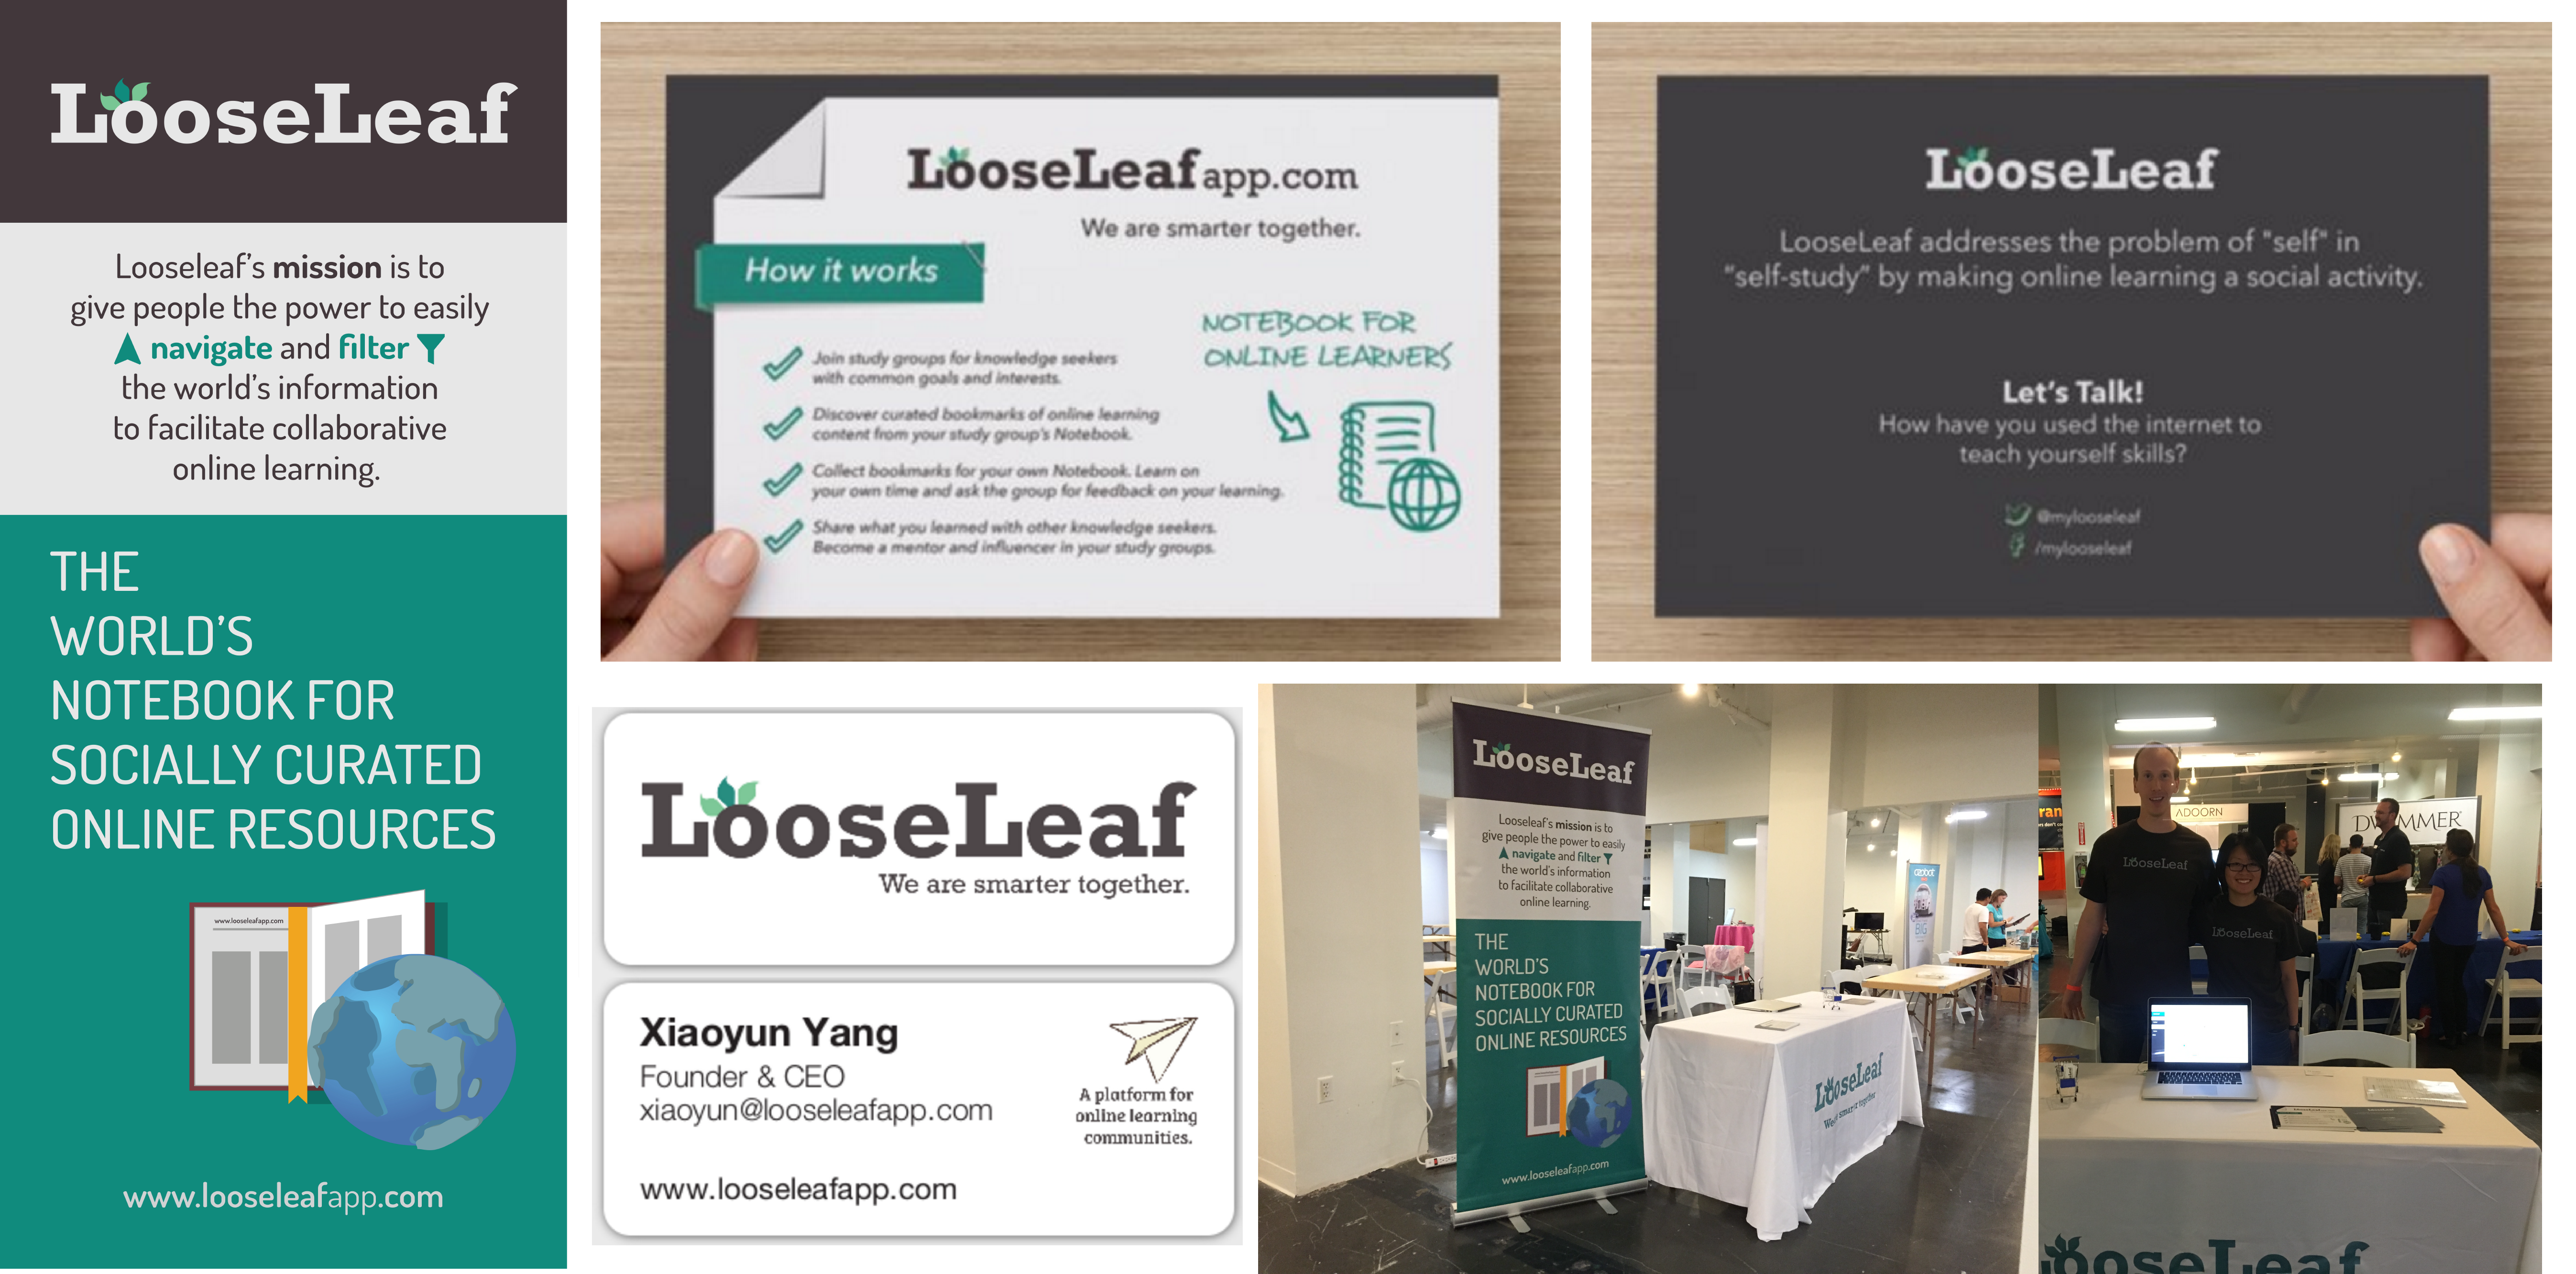 LooseLeaf at TechDay LA in 2016